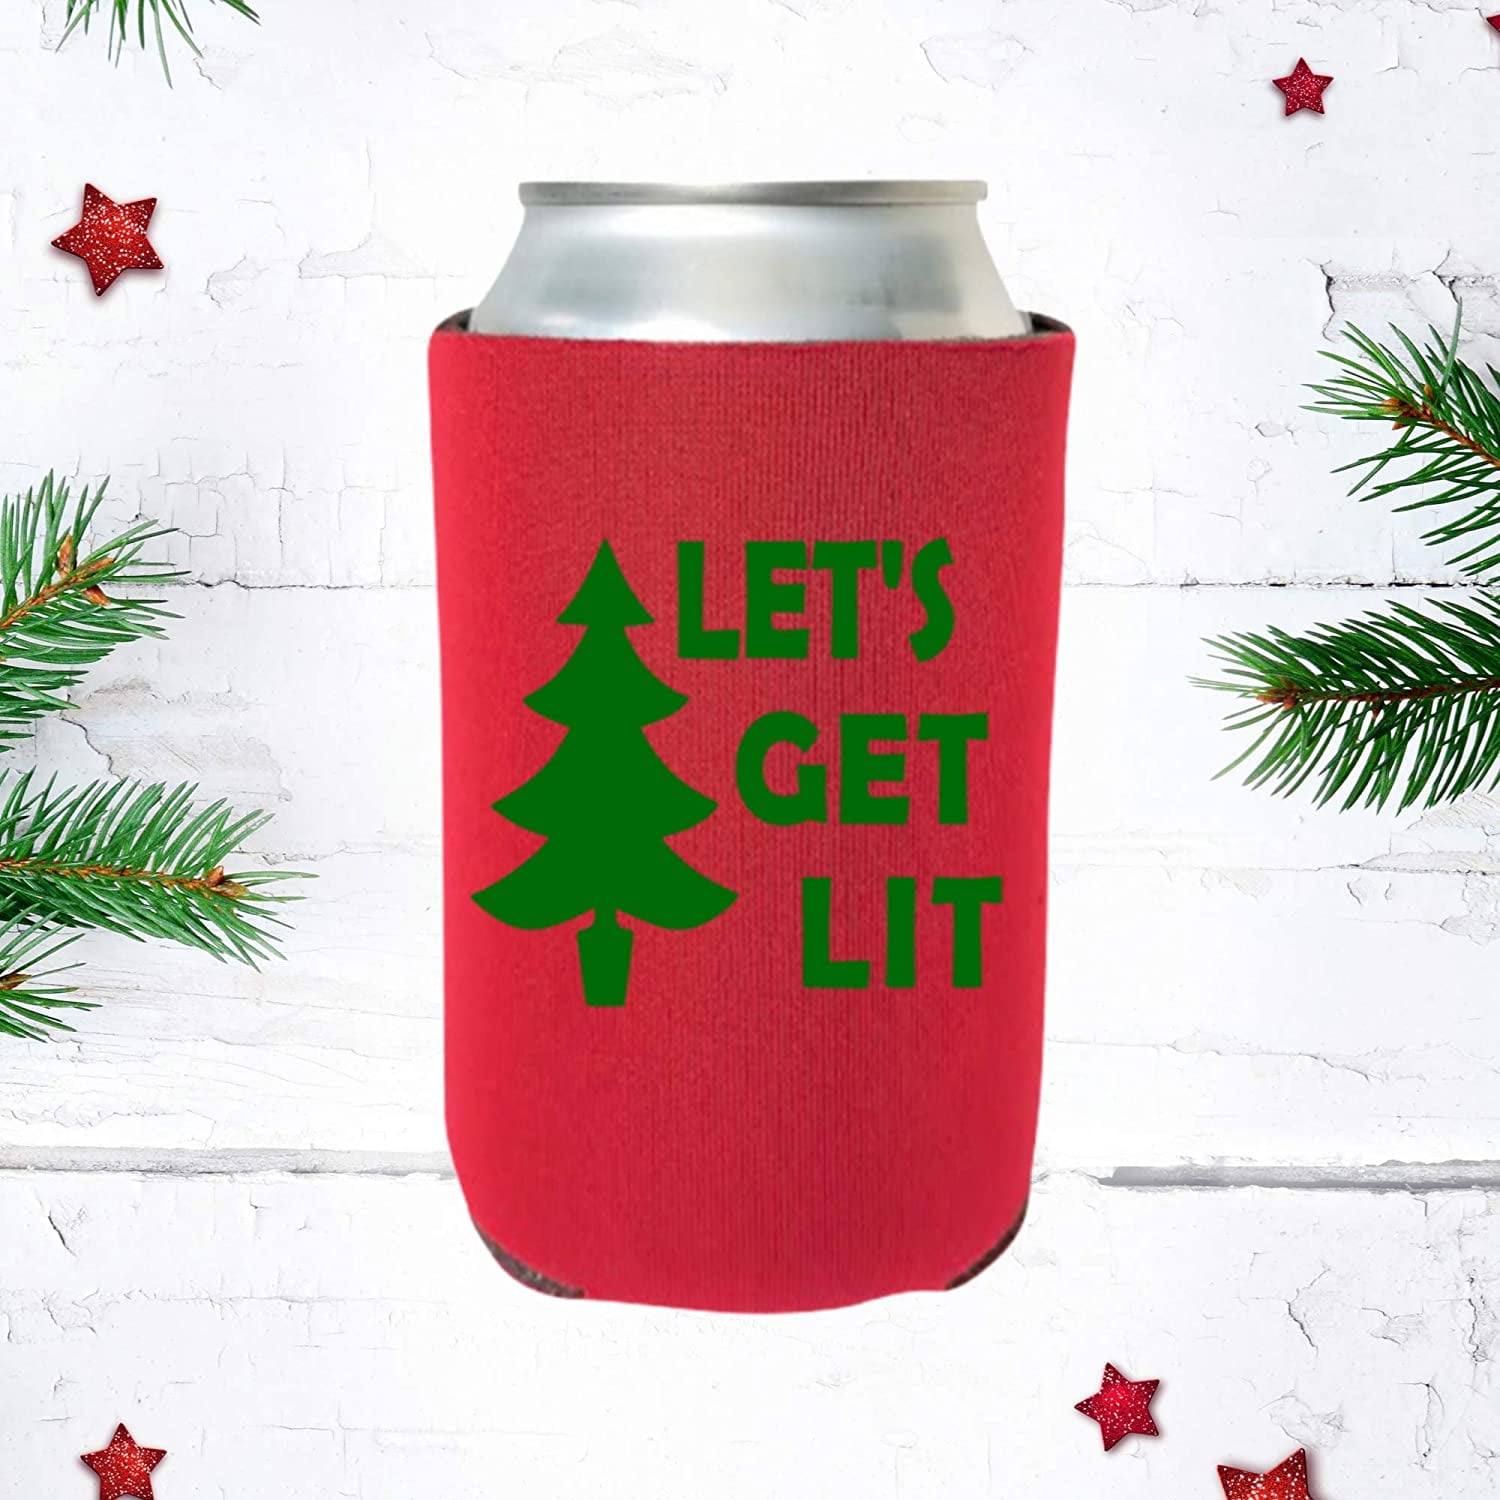  Show Me Them Titties Coozie Funny Can Cooler - Gag Gift - White  Elephant Gift - Beer Can Holder Coozie Sleeve - Soda Beer Caddie - Party  (You Can't Make A